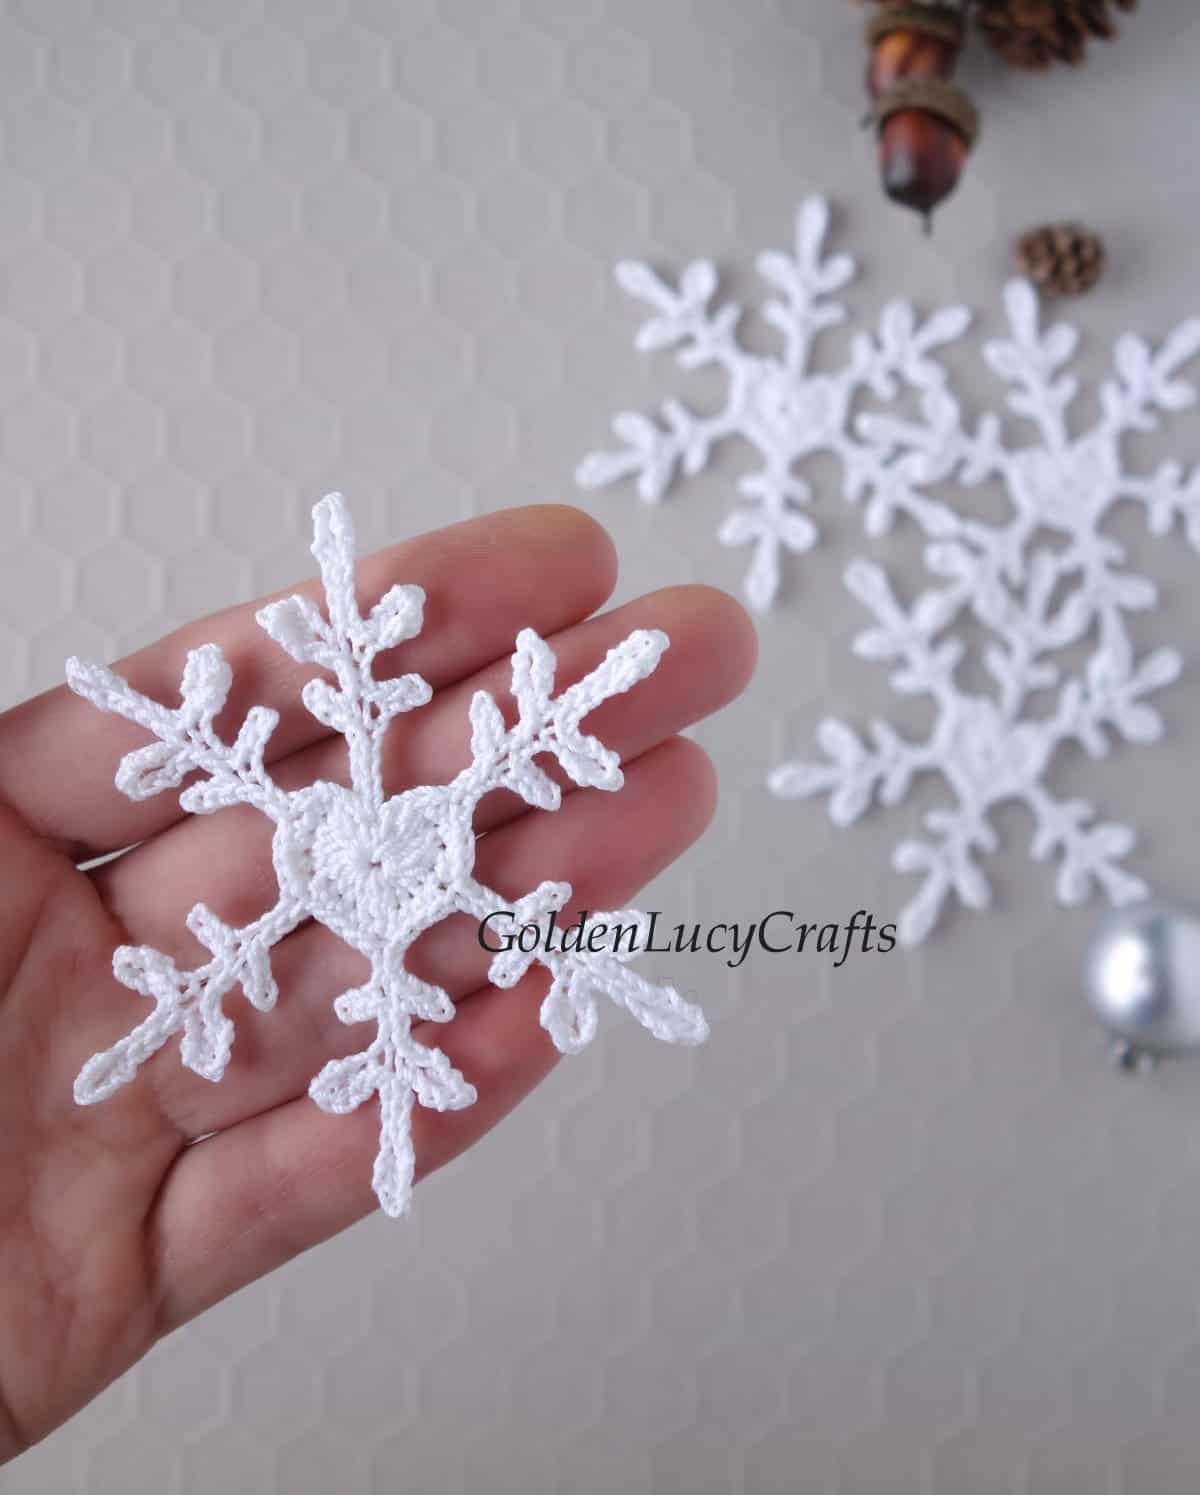 Crochet snowflake in the palm of a hand.